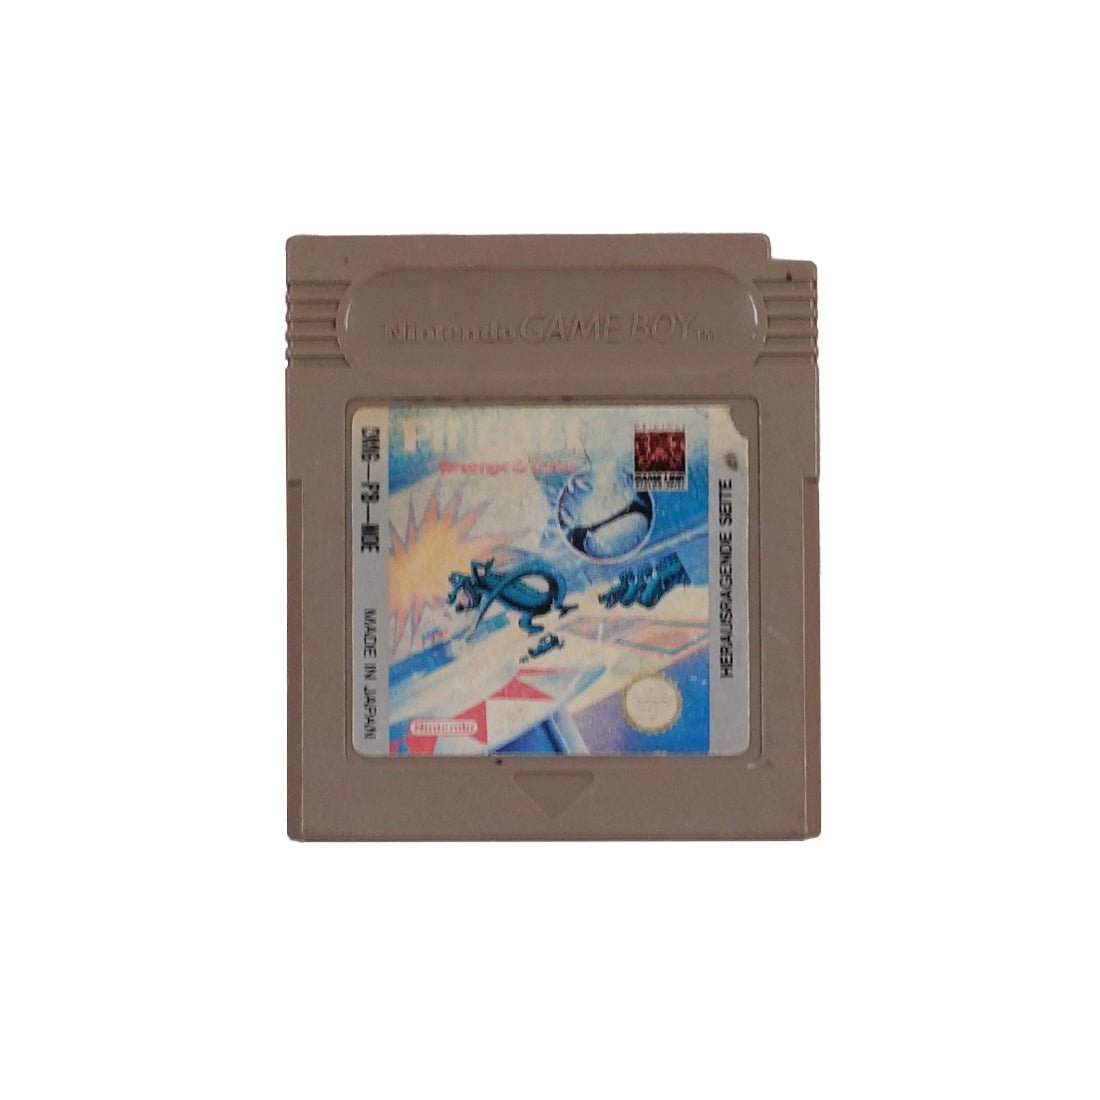 (Pre-Owned) Pinball: Revenge of the Gator - Gameboy Classic - Store 974 | ستور ٩٧٤